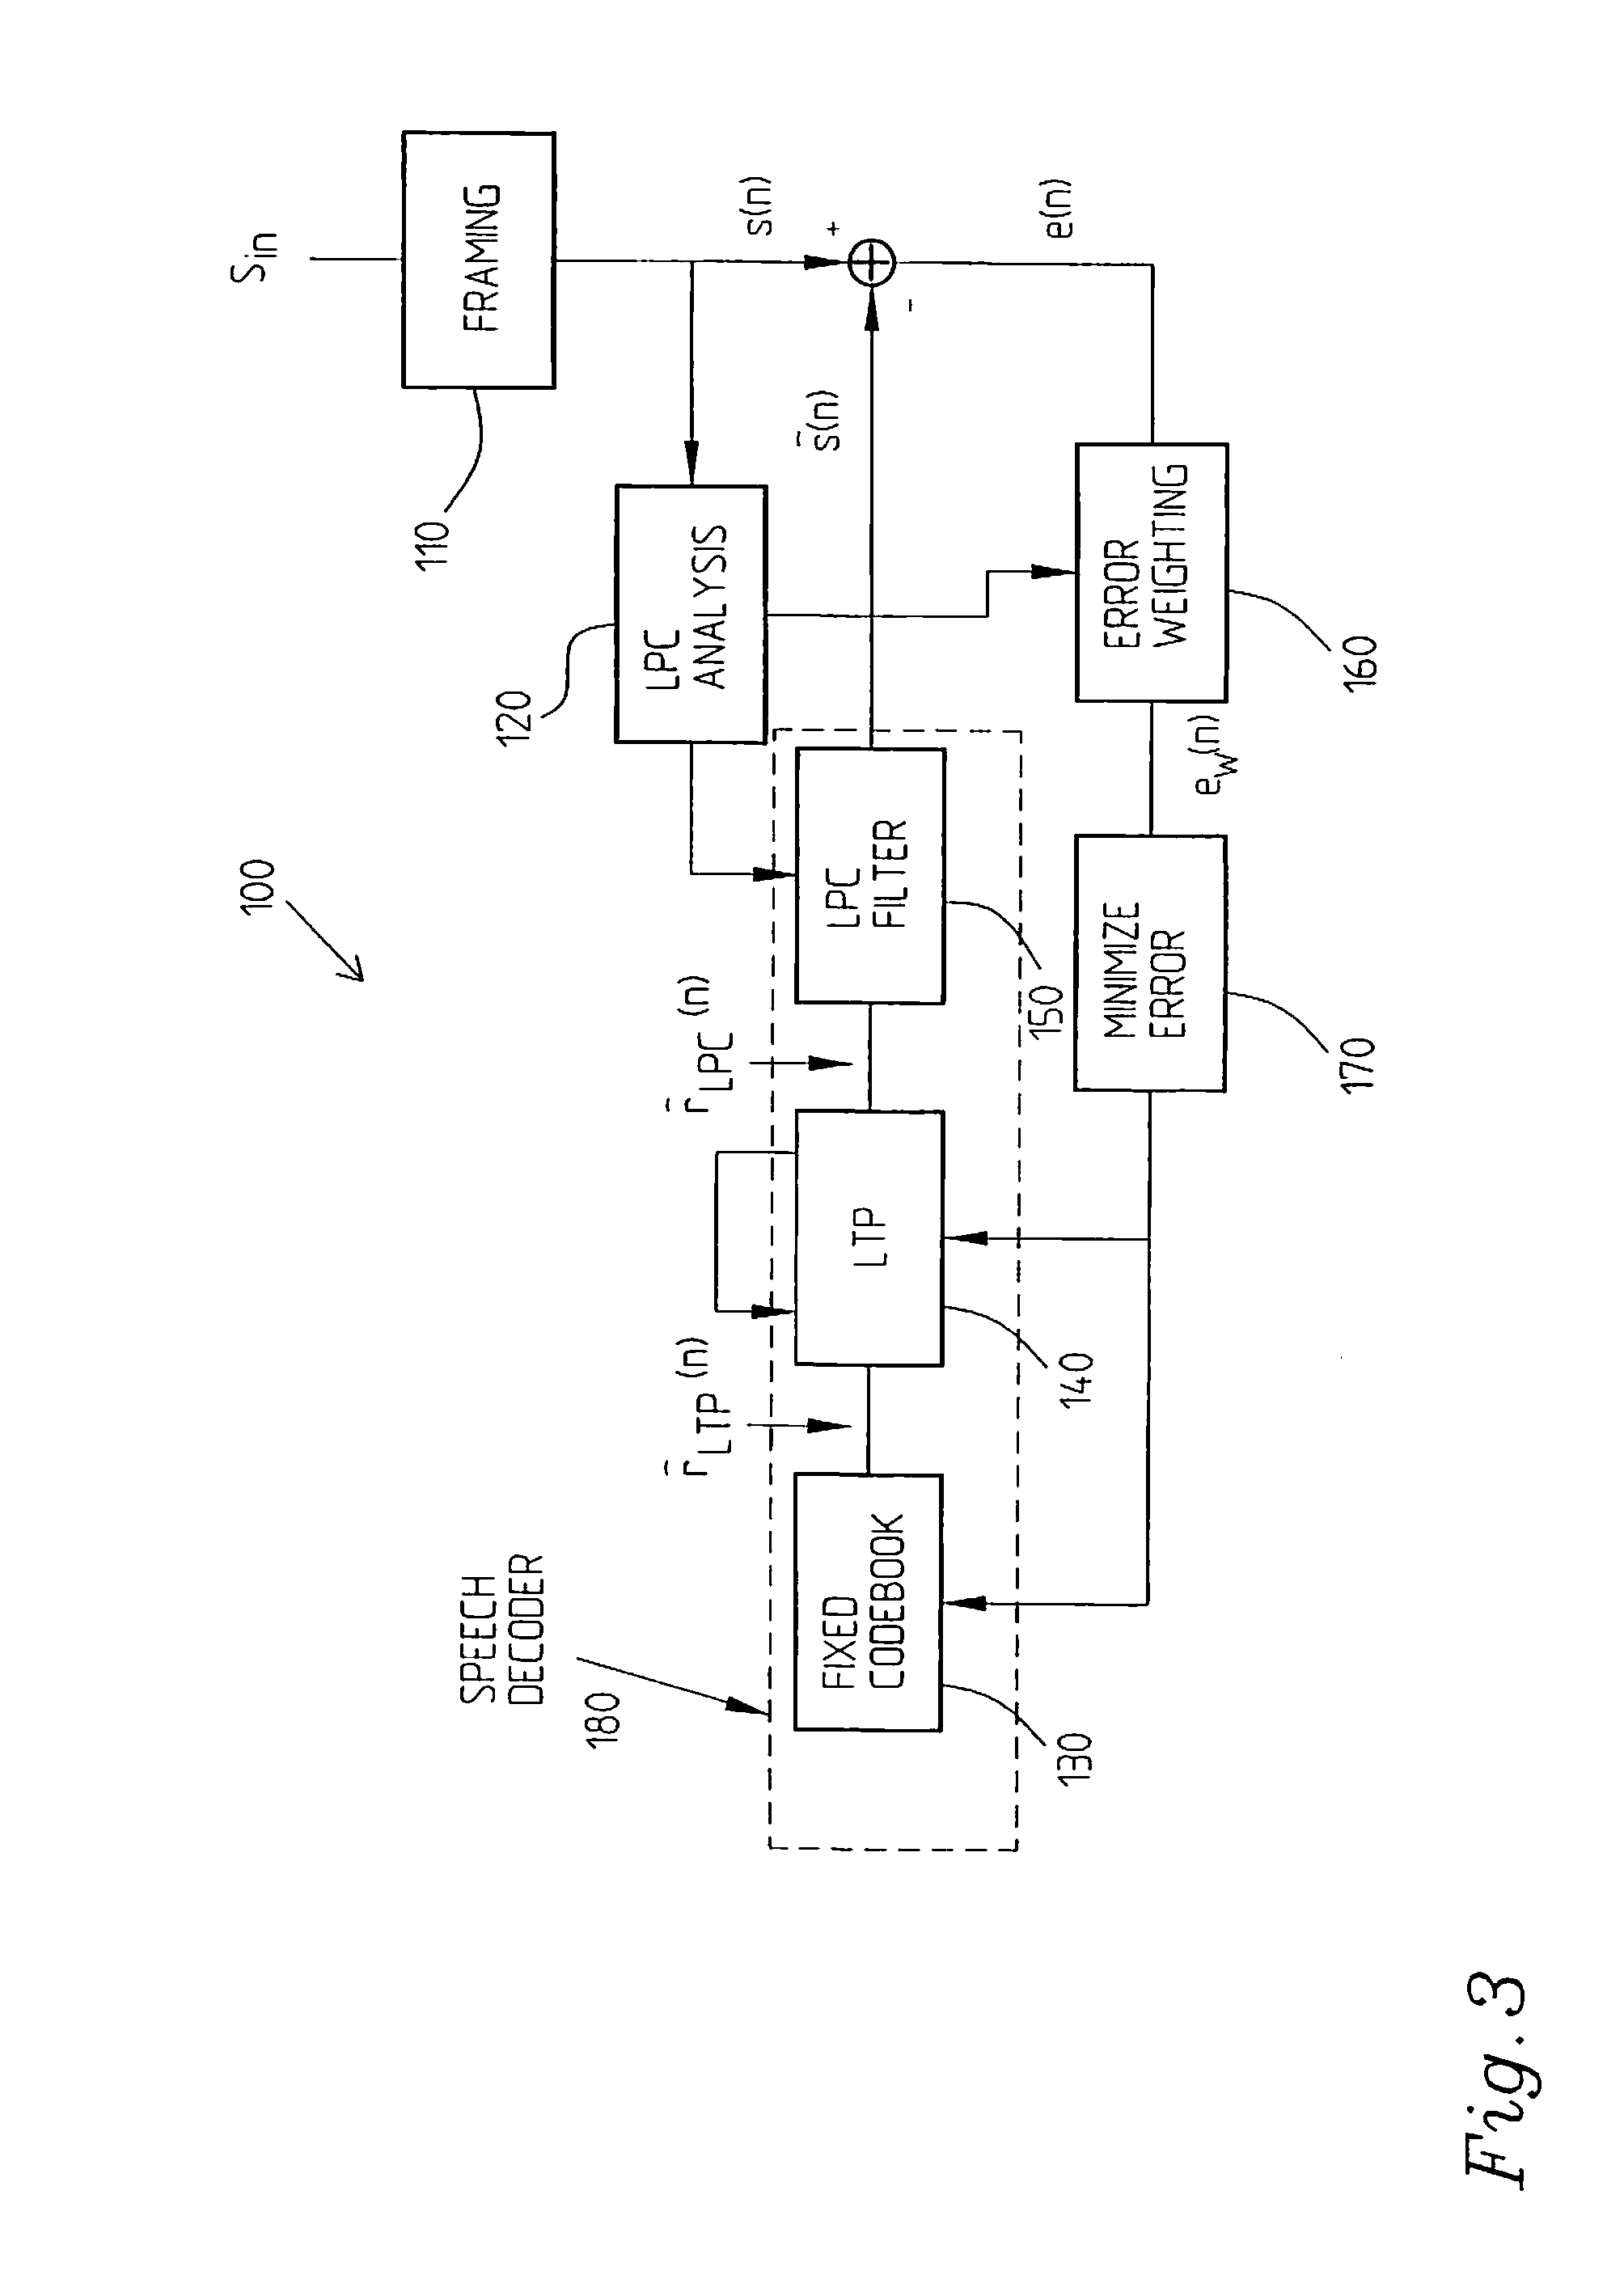 Method of dynamically adapting the size of a jitter buffer